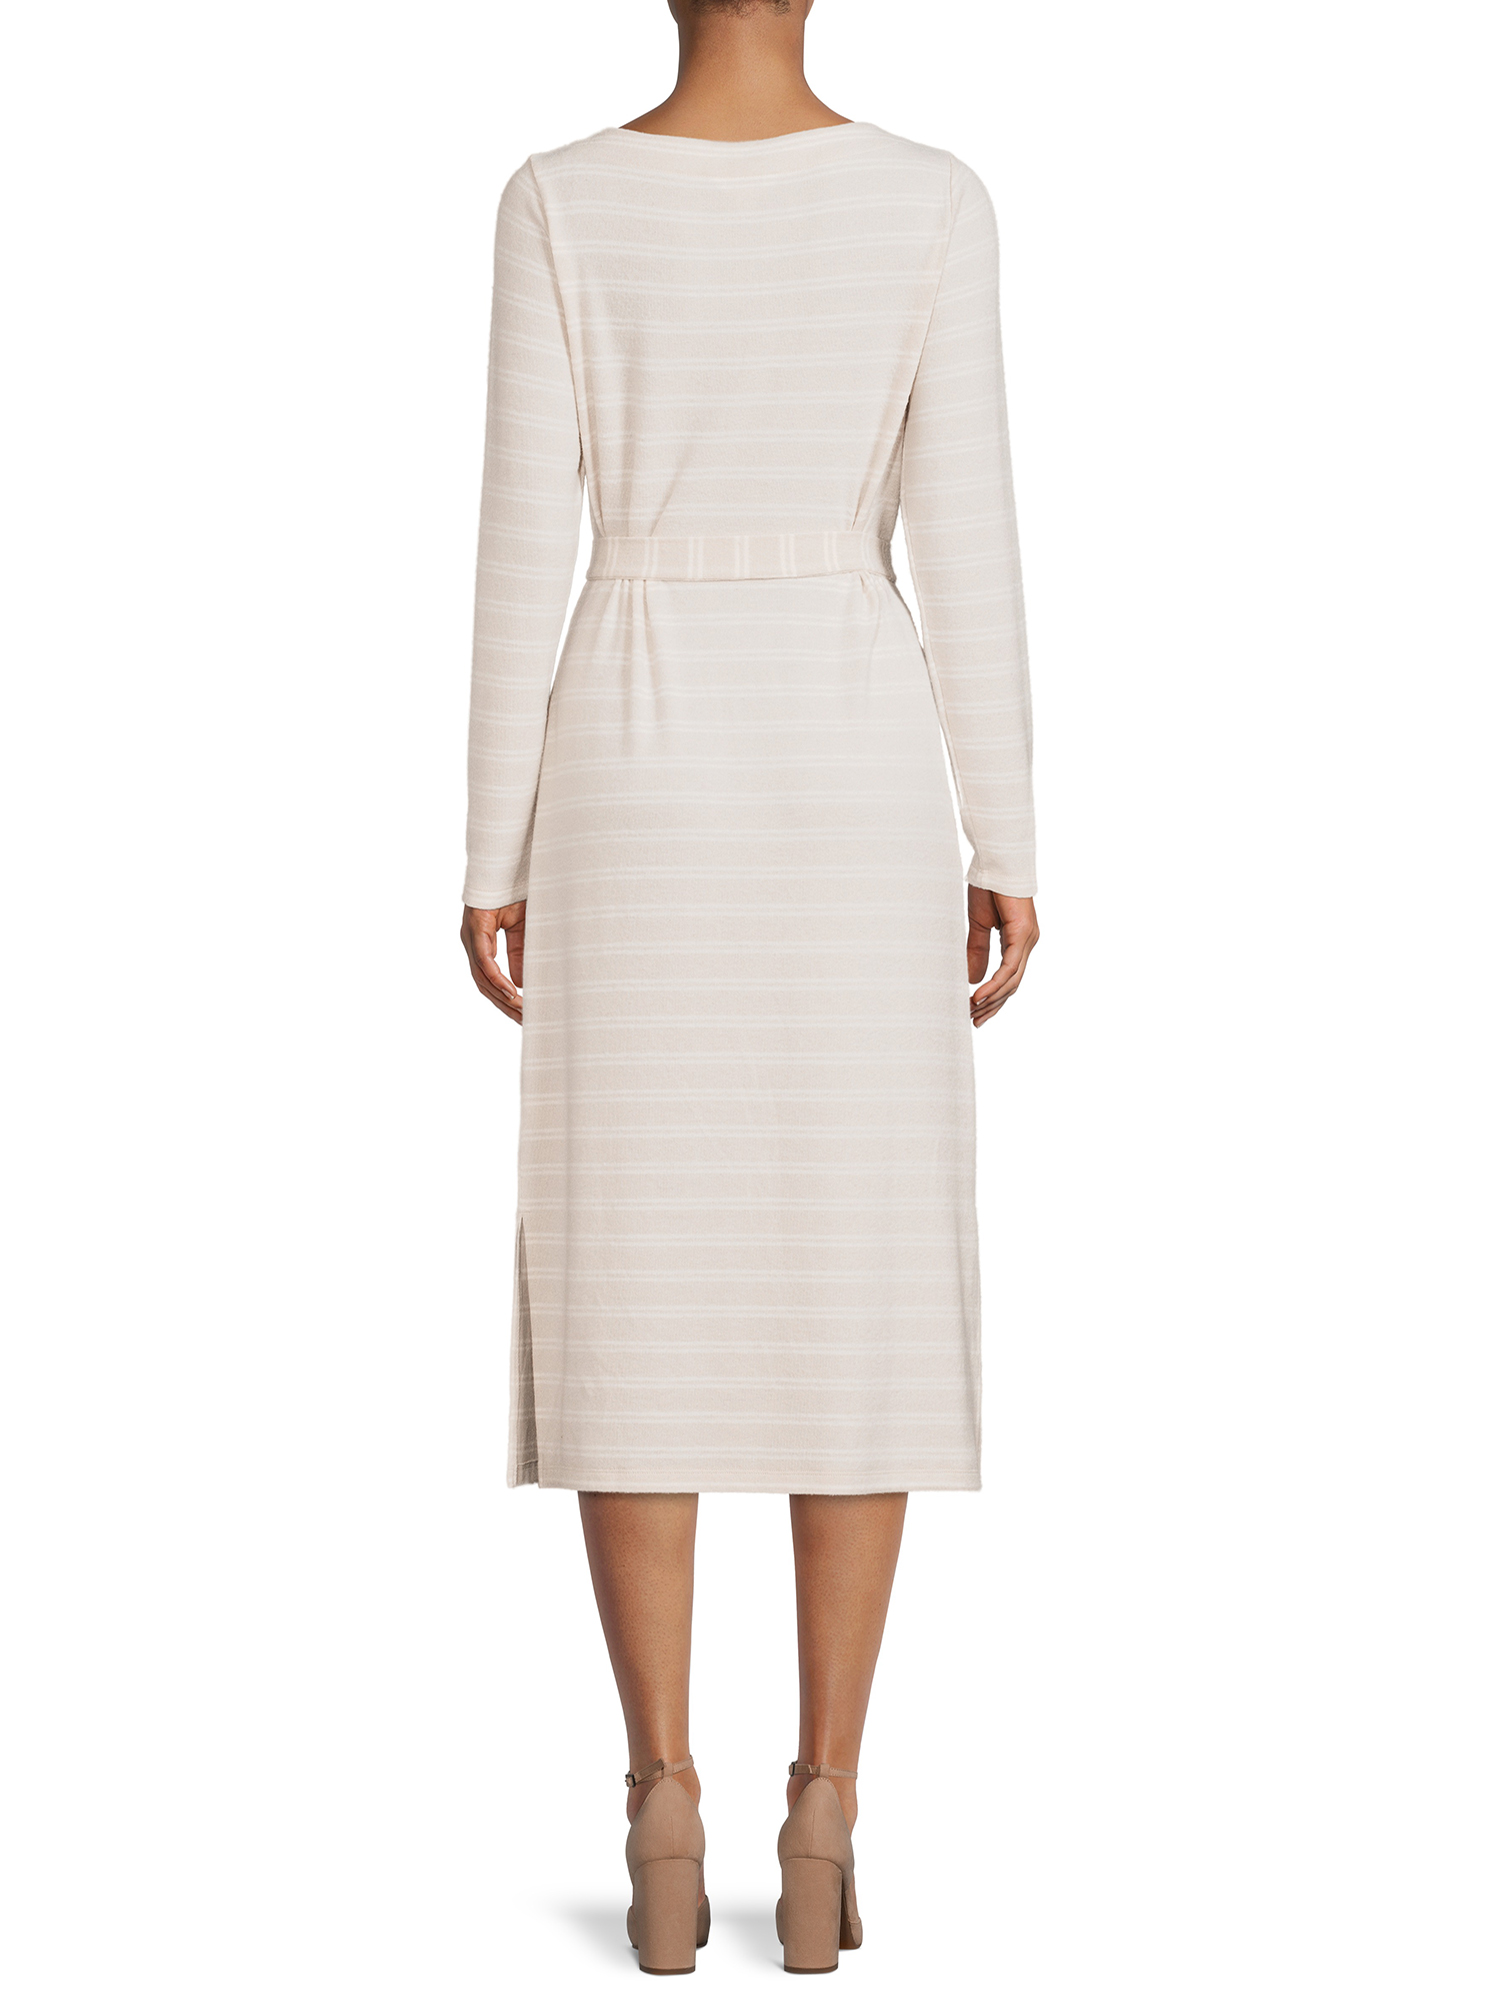 Time and Tru Women's Hacci Dress with Long Sleeves - image 3 of 5